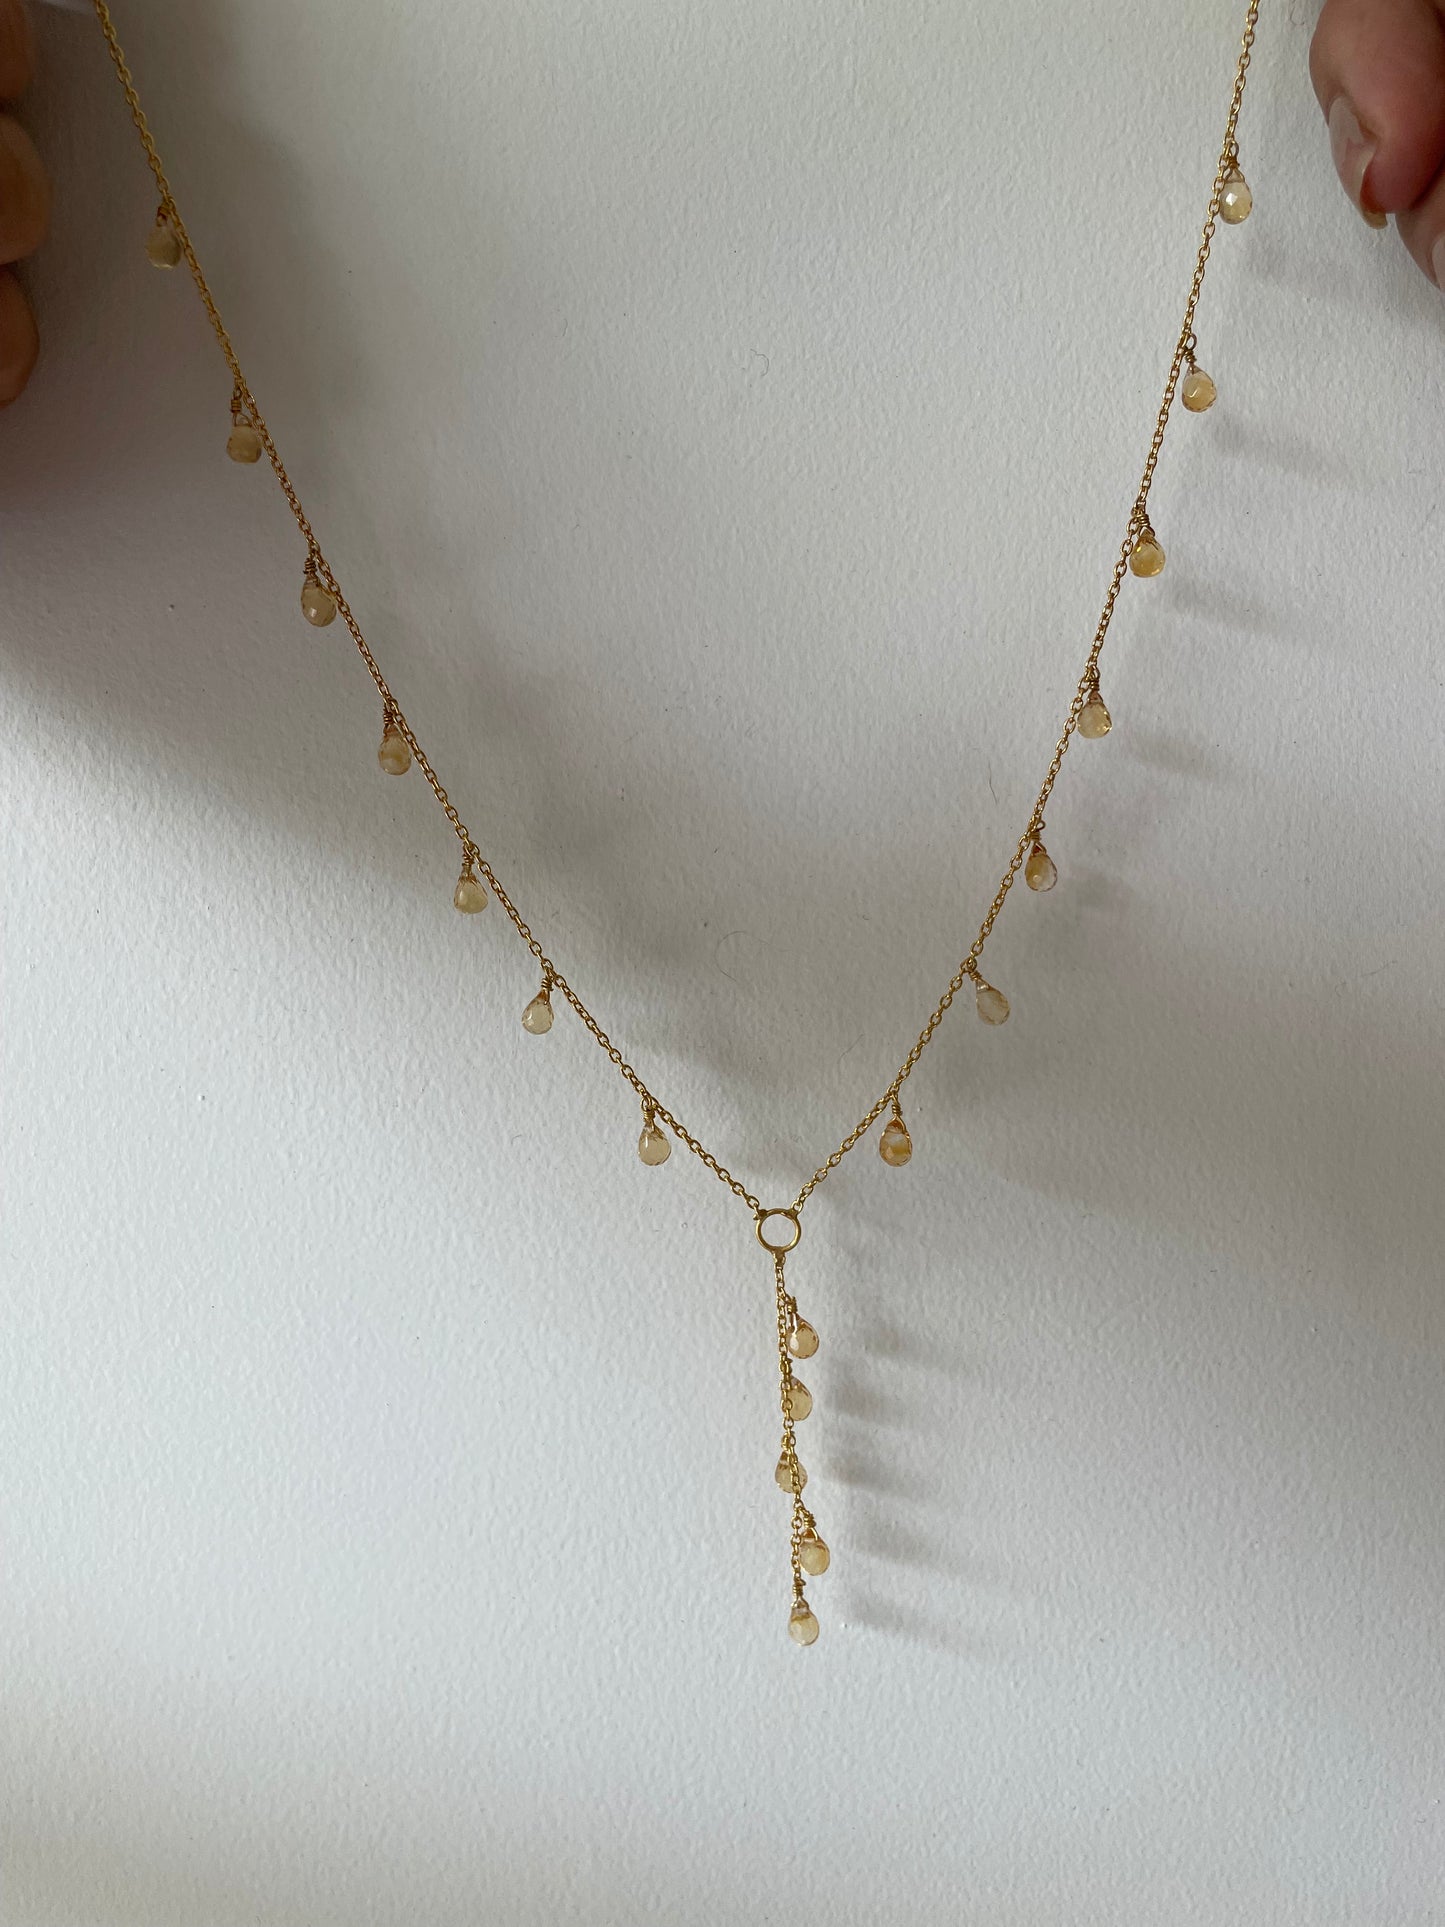 Daisy - 22K Gold Plated Necklet